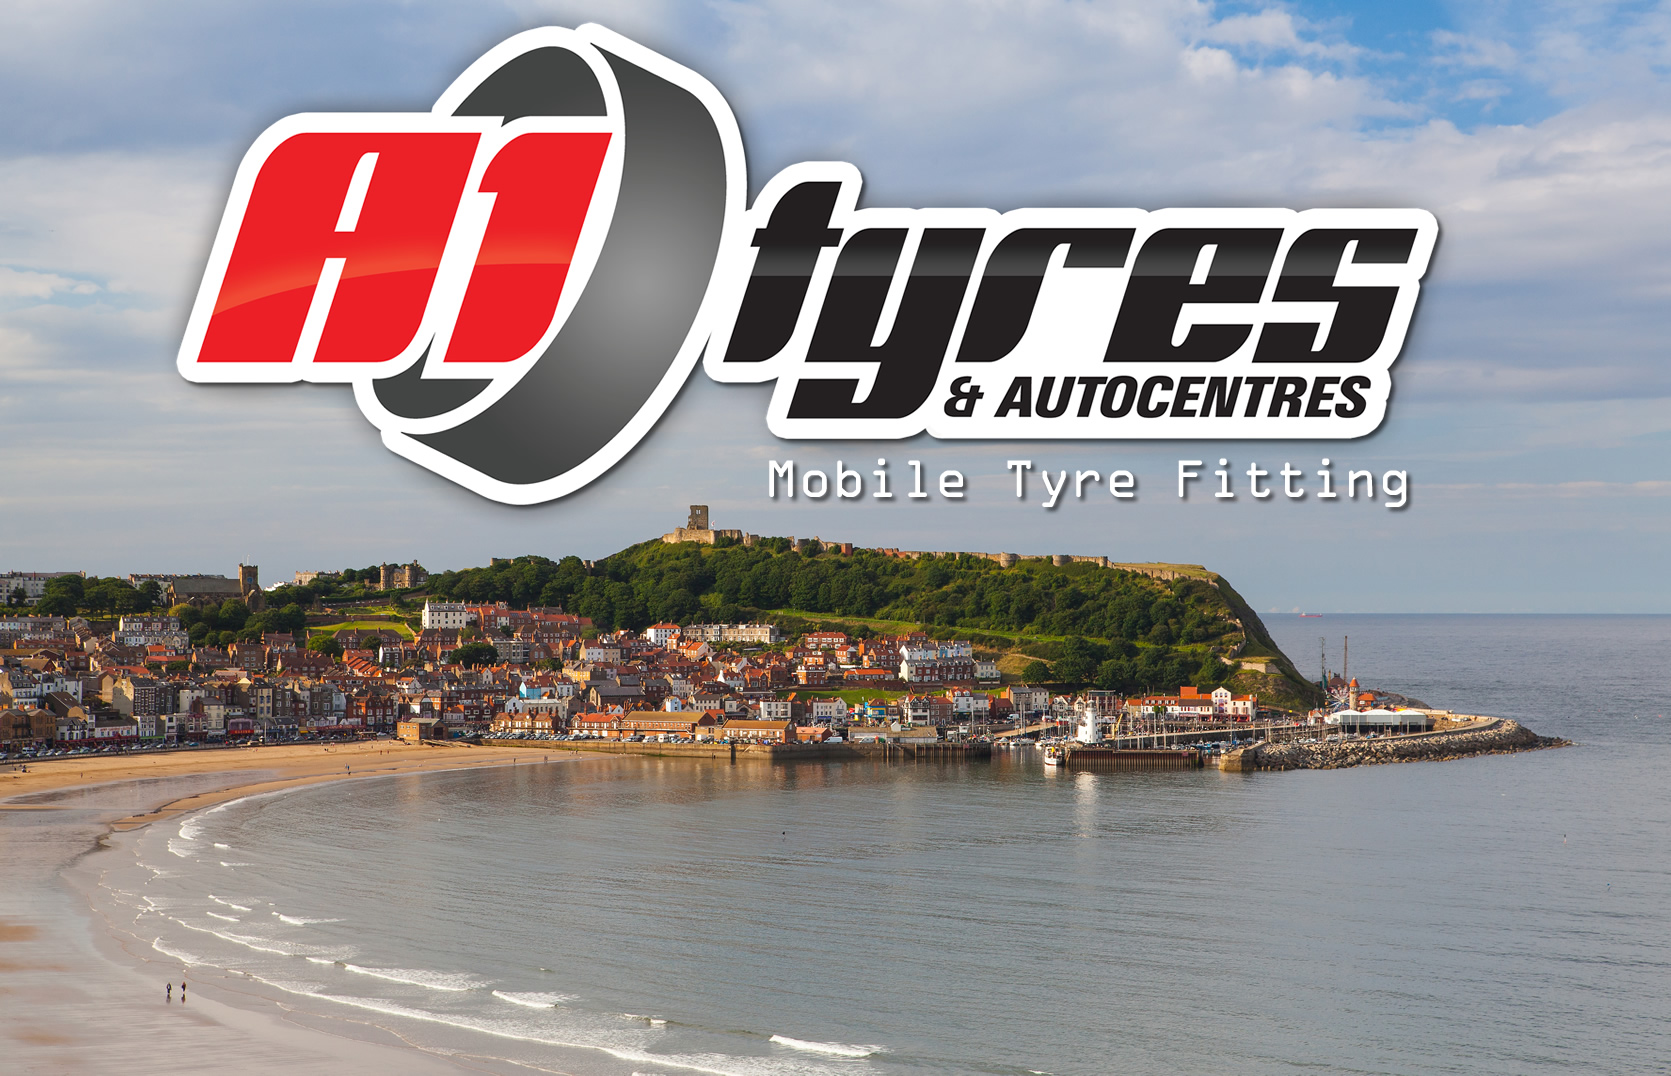 Mobile tyre fitting scarborough